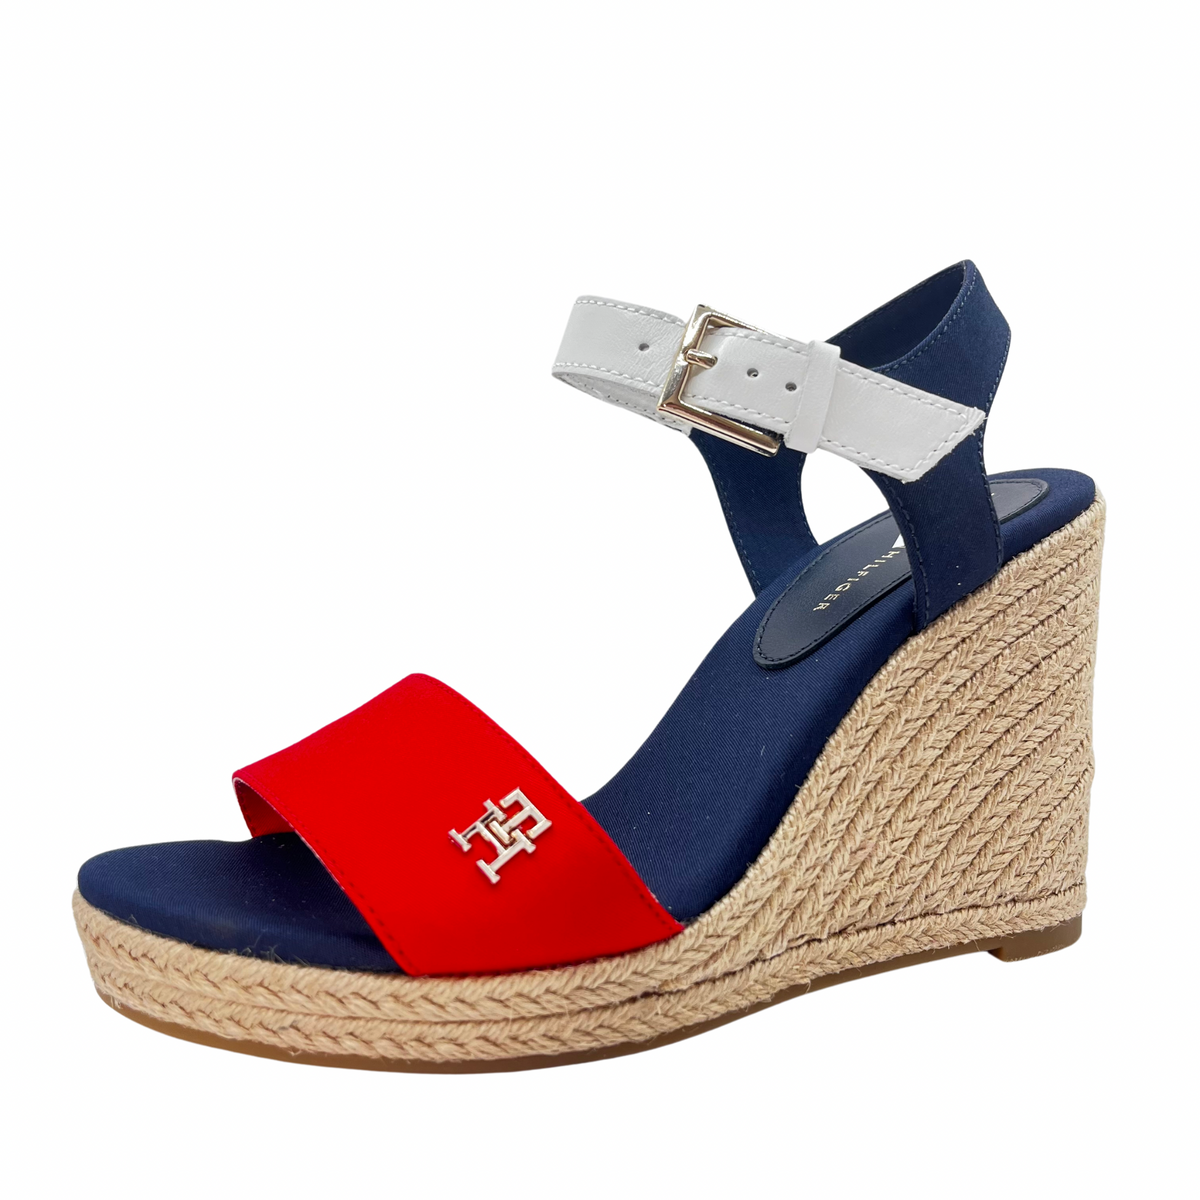 Tommy Hilfiger Navy, Red and White Woven Wedge